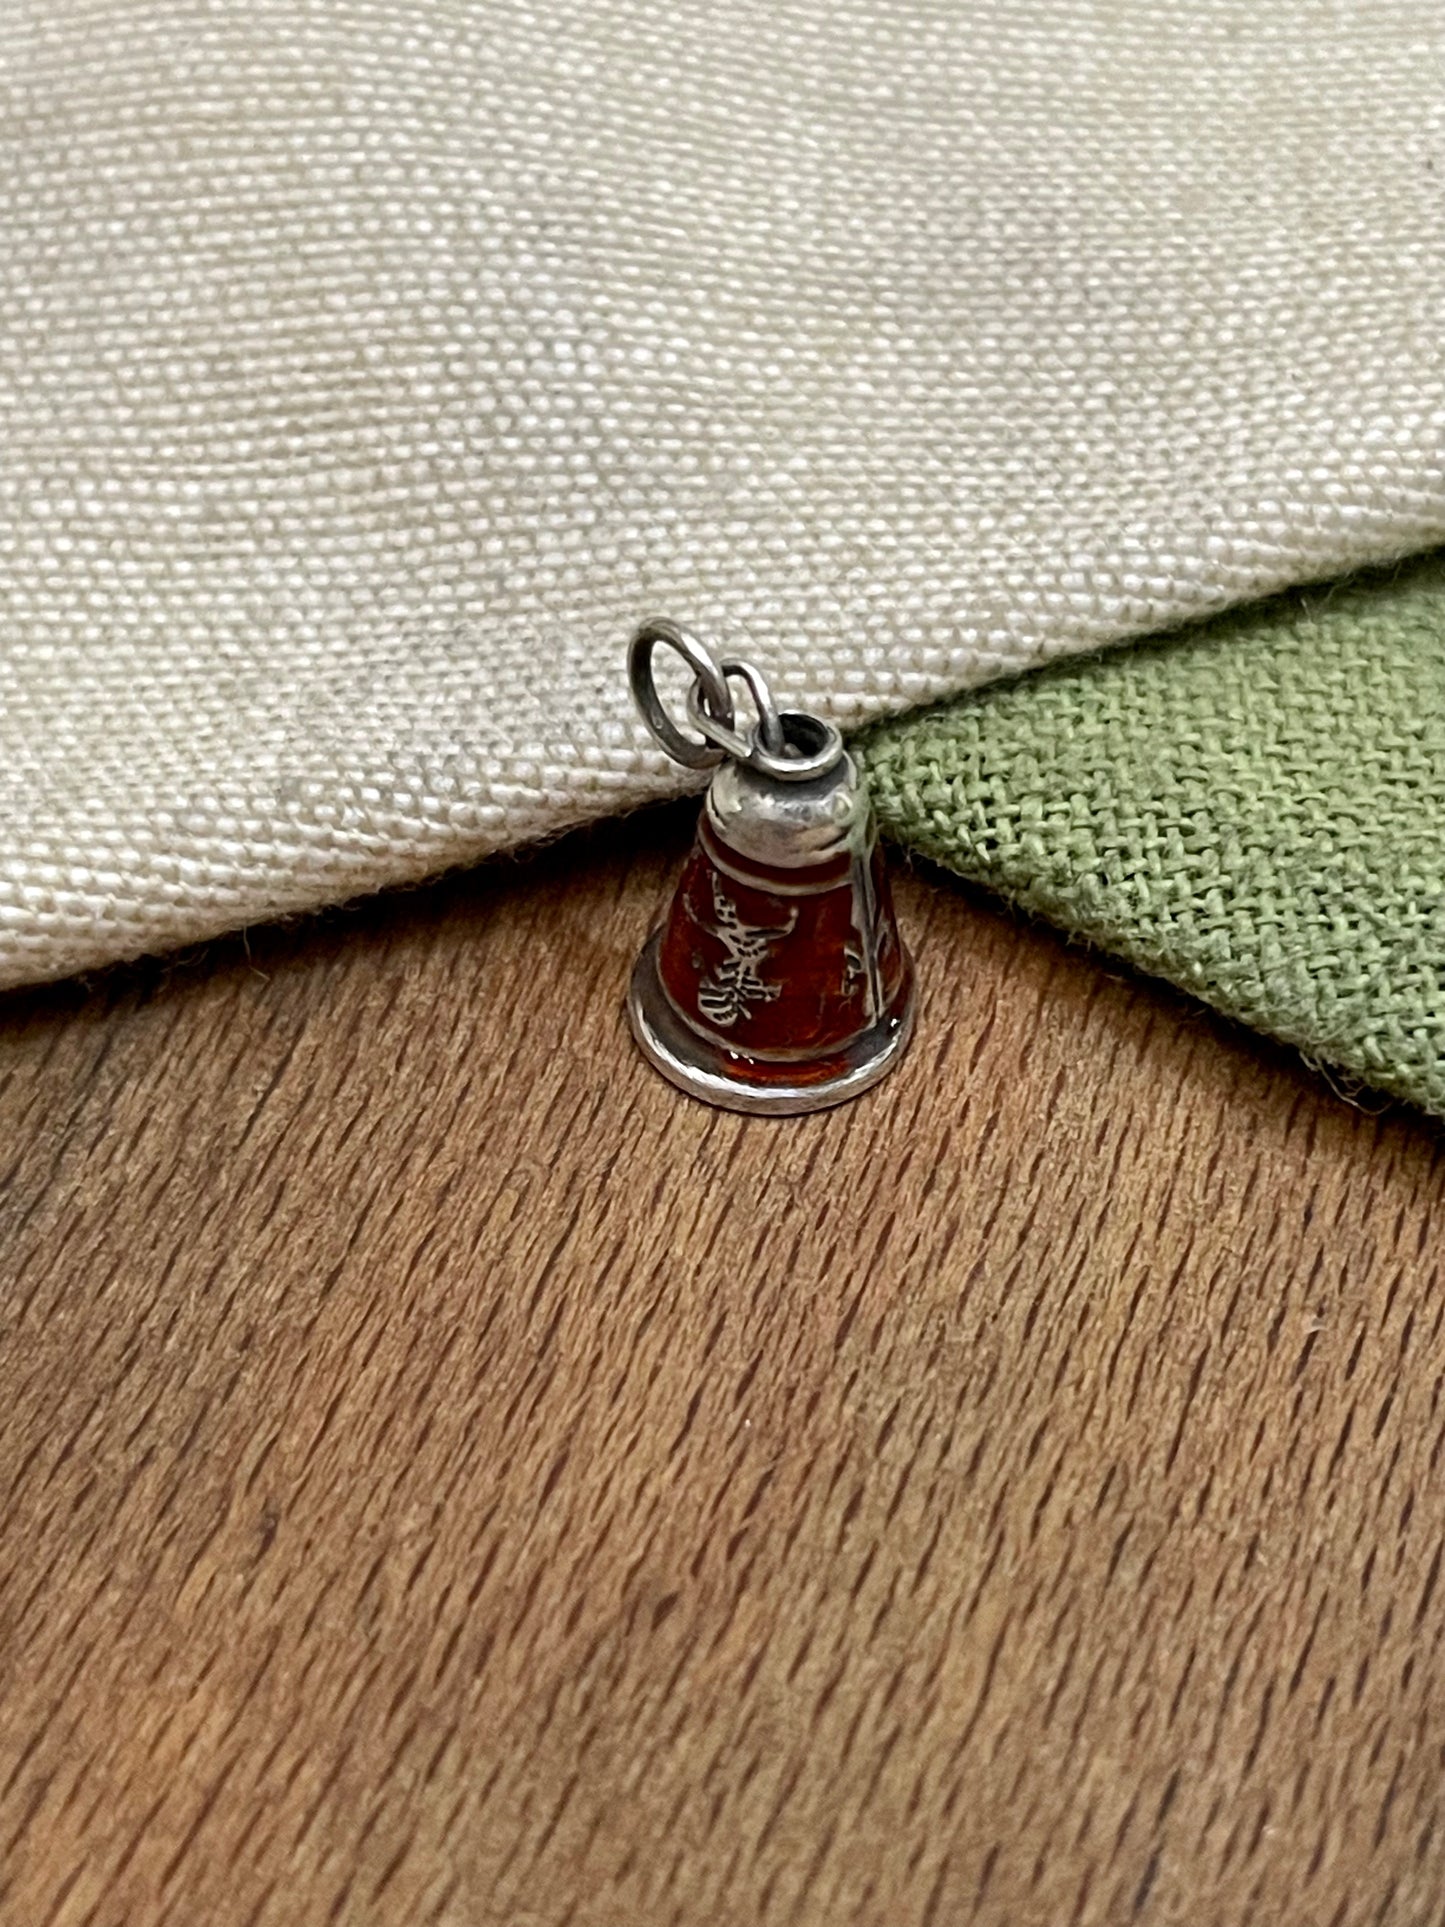 Nice Old Red Enamel Bell Charm Pendent Solid 925 Sterling Silver Vintage Retro